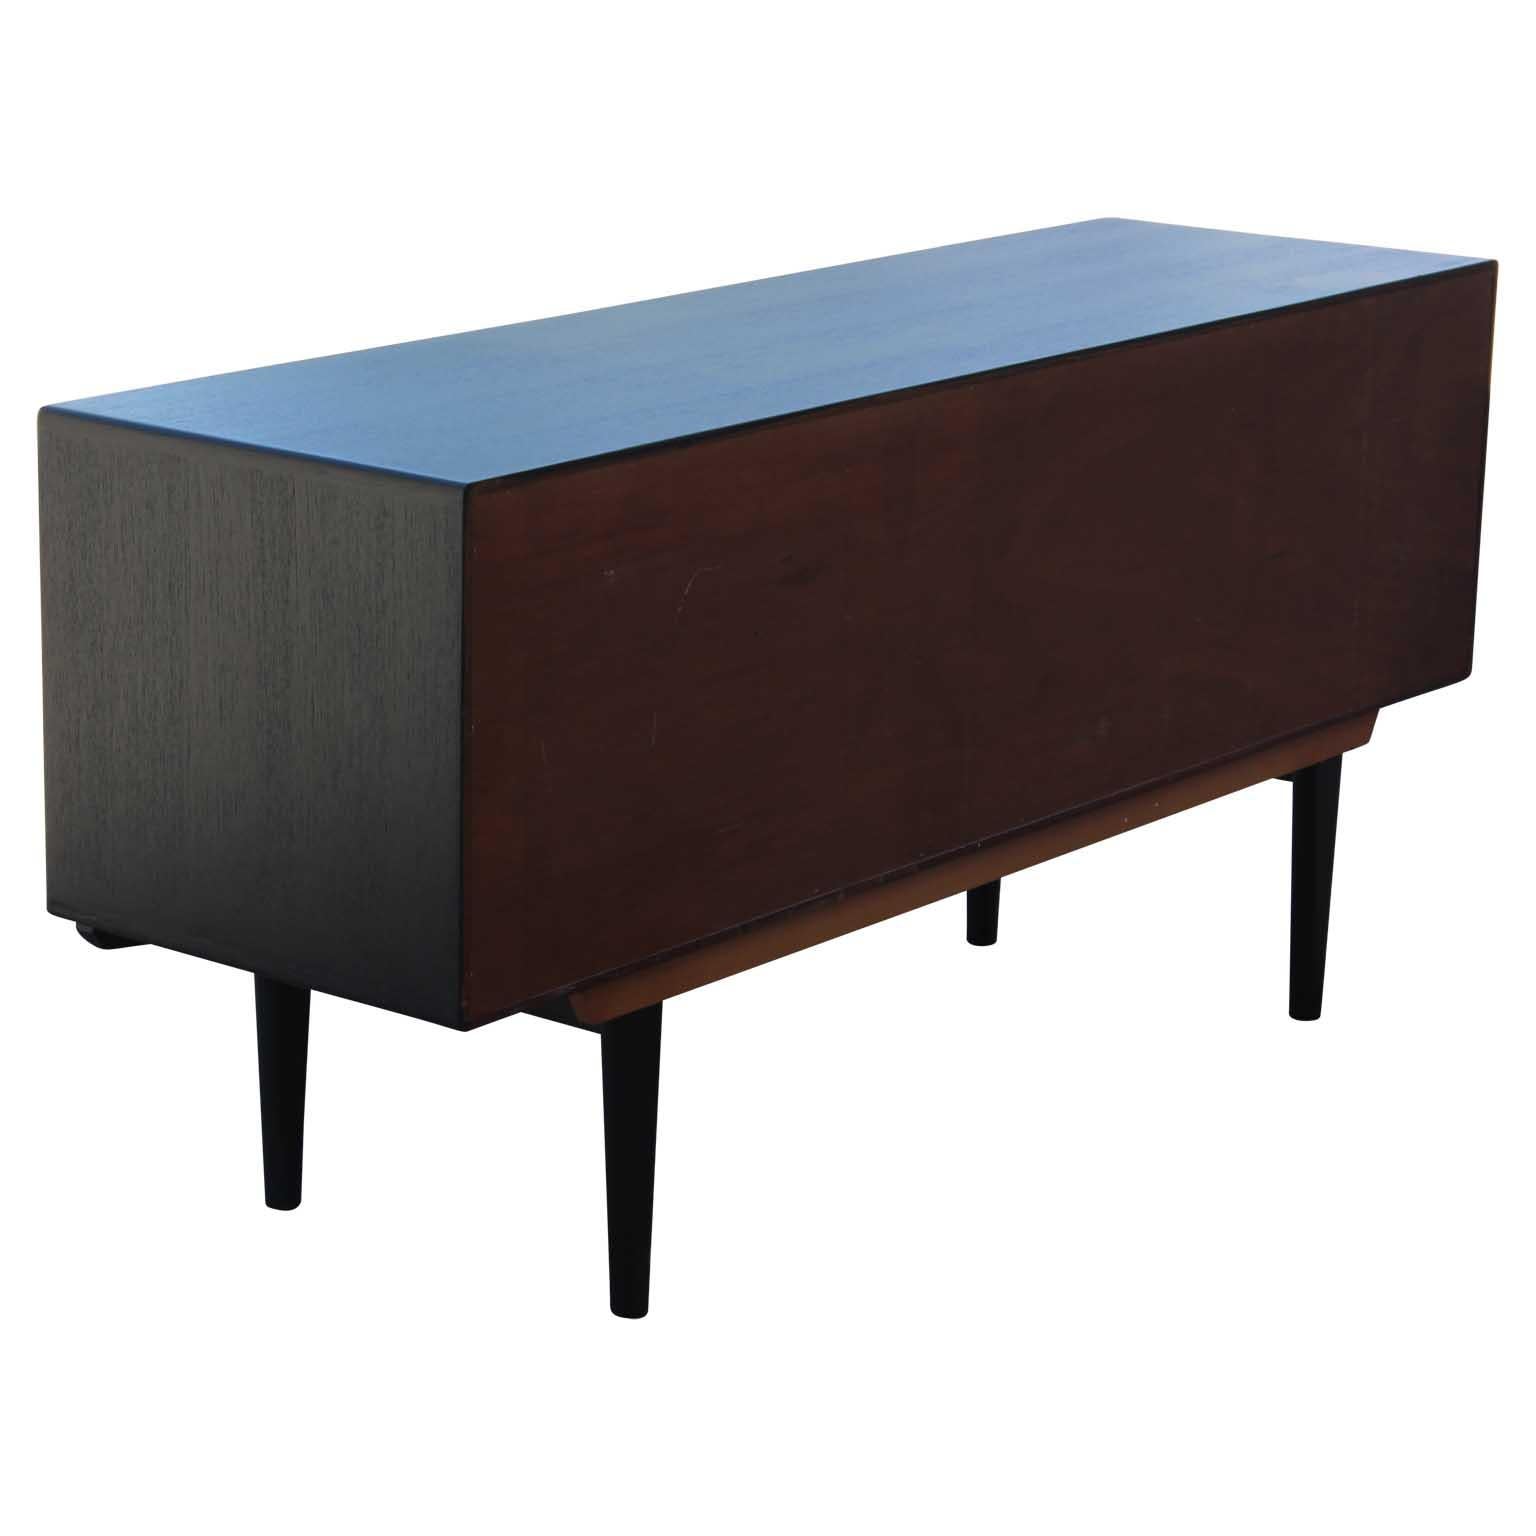 American Modern Two-Tone Black and Natural Credenza / Sideboard Brass Handles